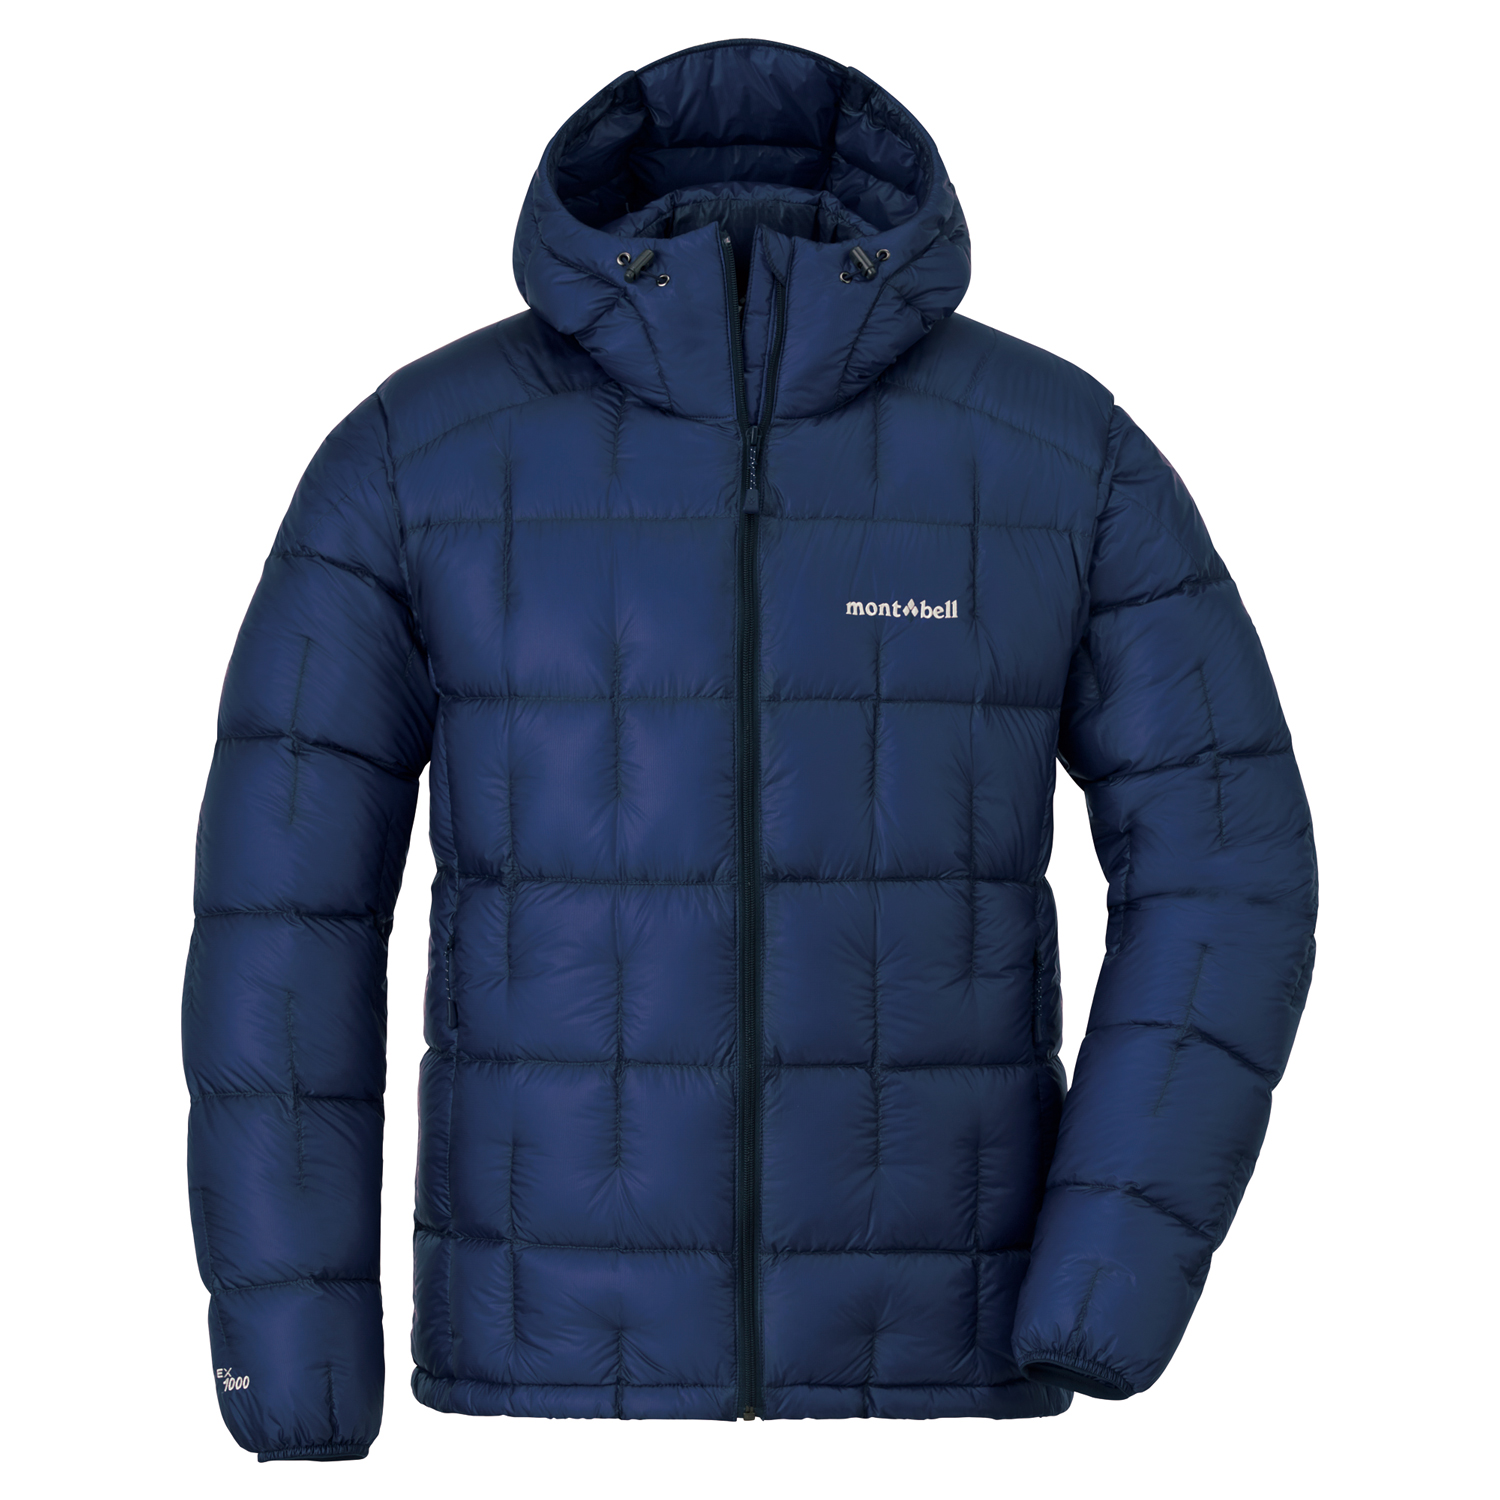 Unlock Wilderness' choice in the Montbell Vs North Face comparison, the Plasma 1000 Alpine Down Parka by Montbell